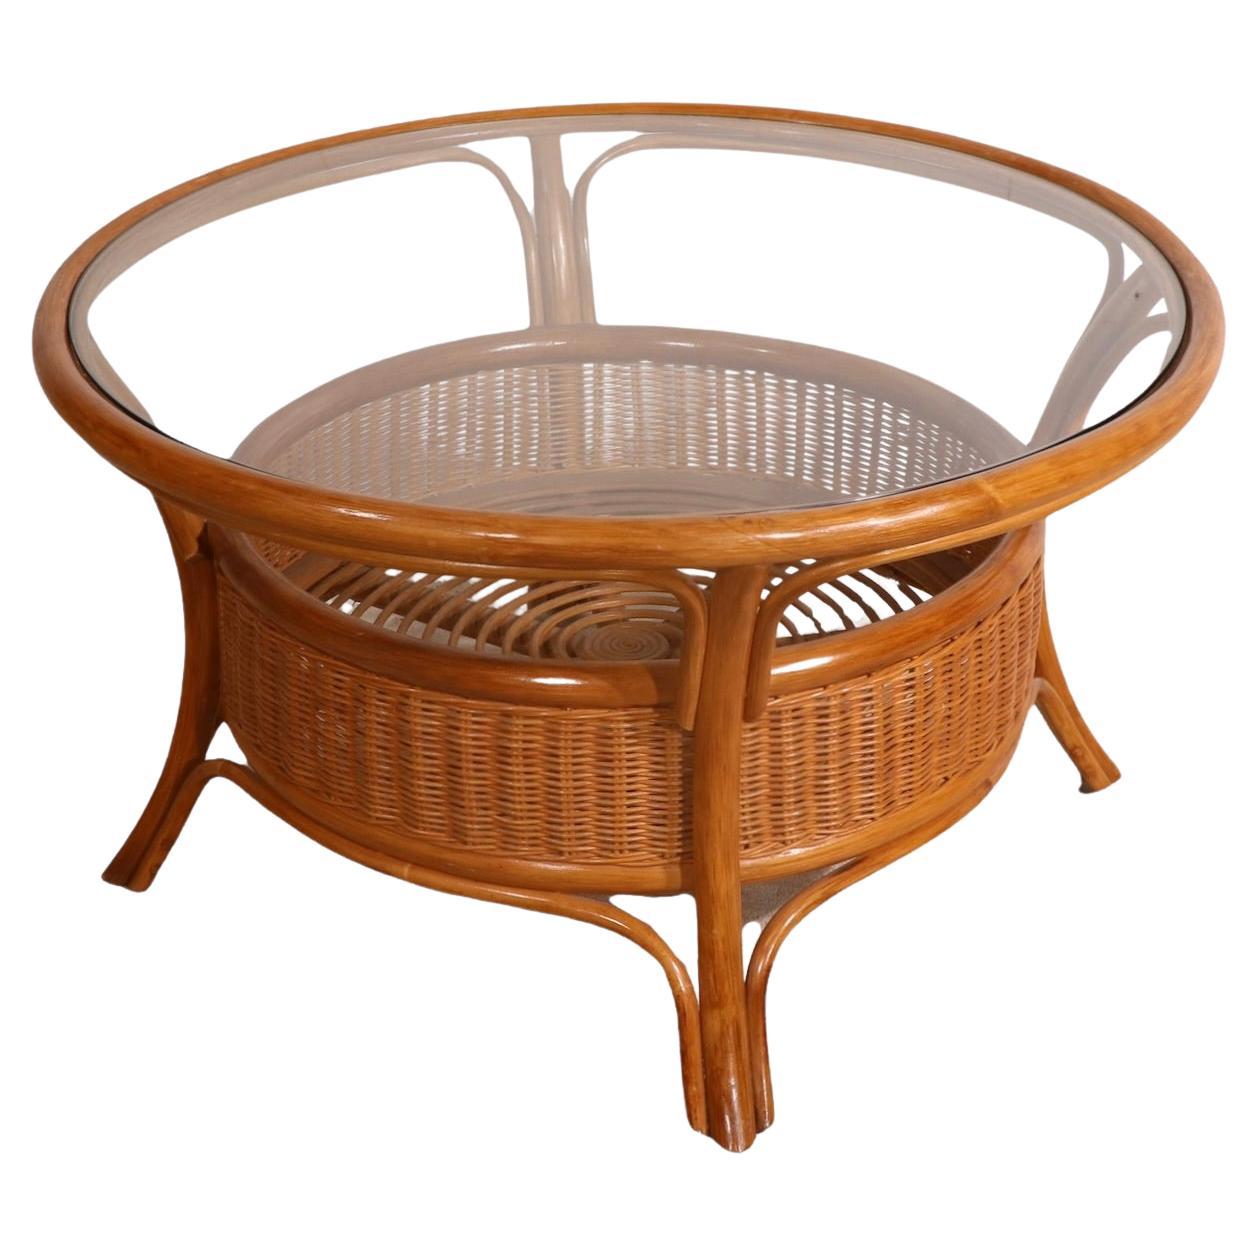 Elegant and casual style coffee table, in excellent original condition, clean and ready to use. The table has its original glass top, which rests in place on the bamboo and wicker base. Nicely executed and well detailed table, in very fine